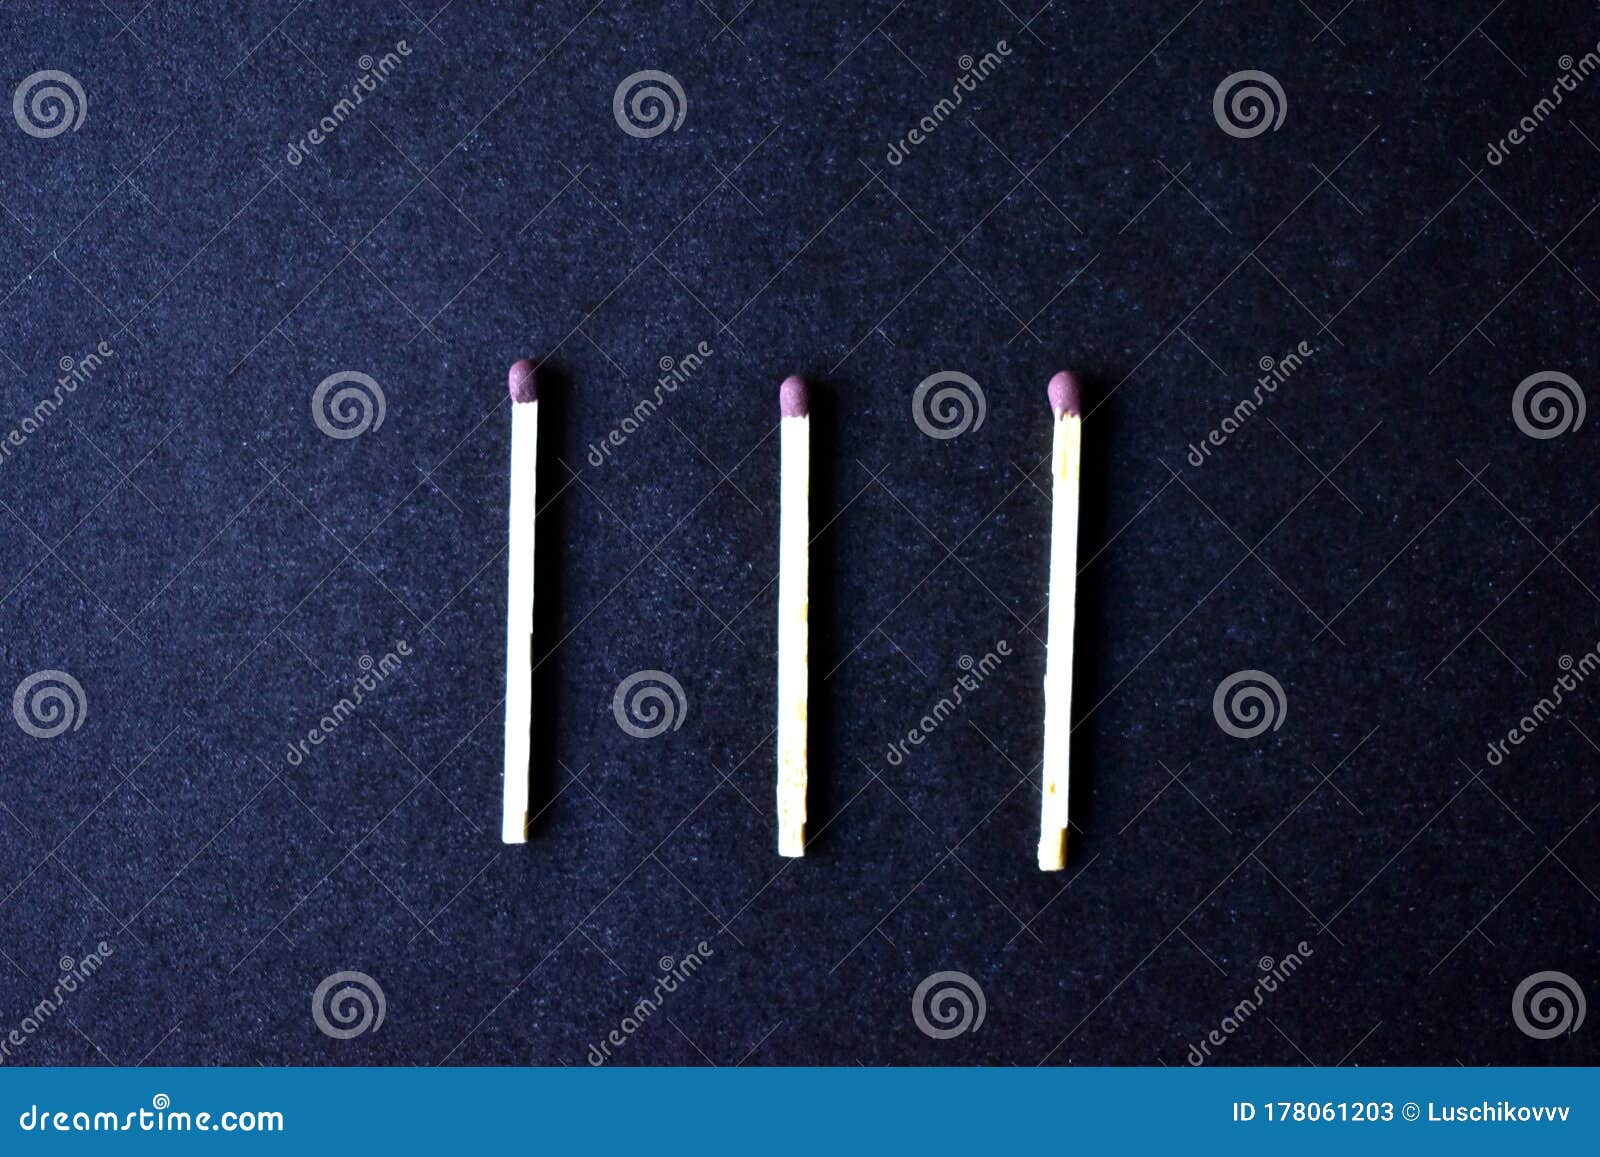 household matches and boxes for lighting on a blue background